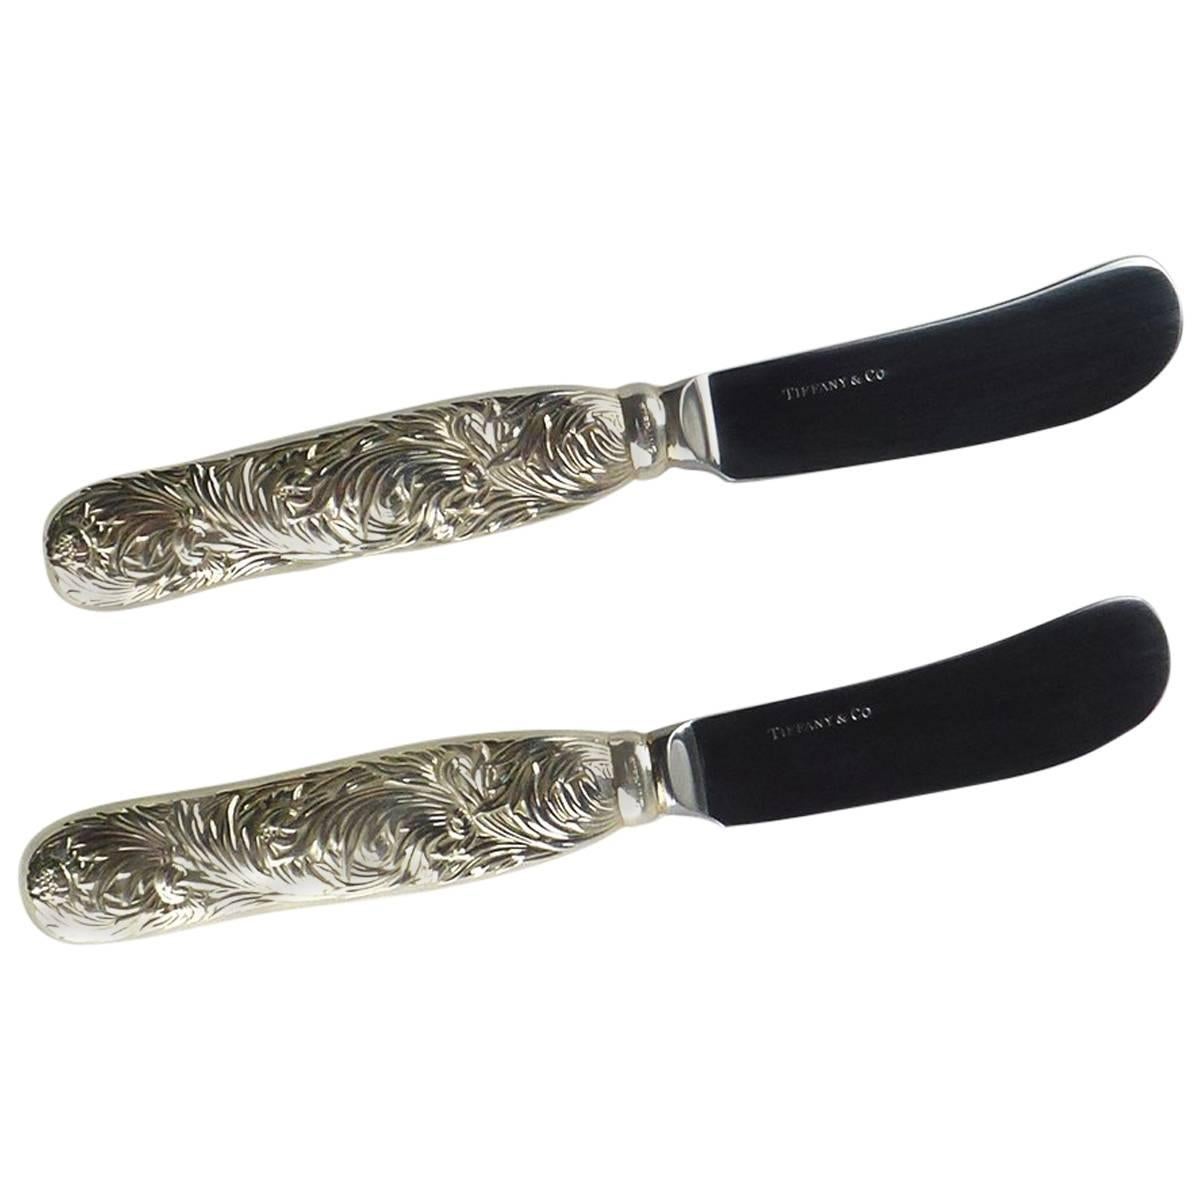 Tiffany & Co. Sterling Silver Chrysanthemum Pattern Pair of Butter Knives